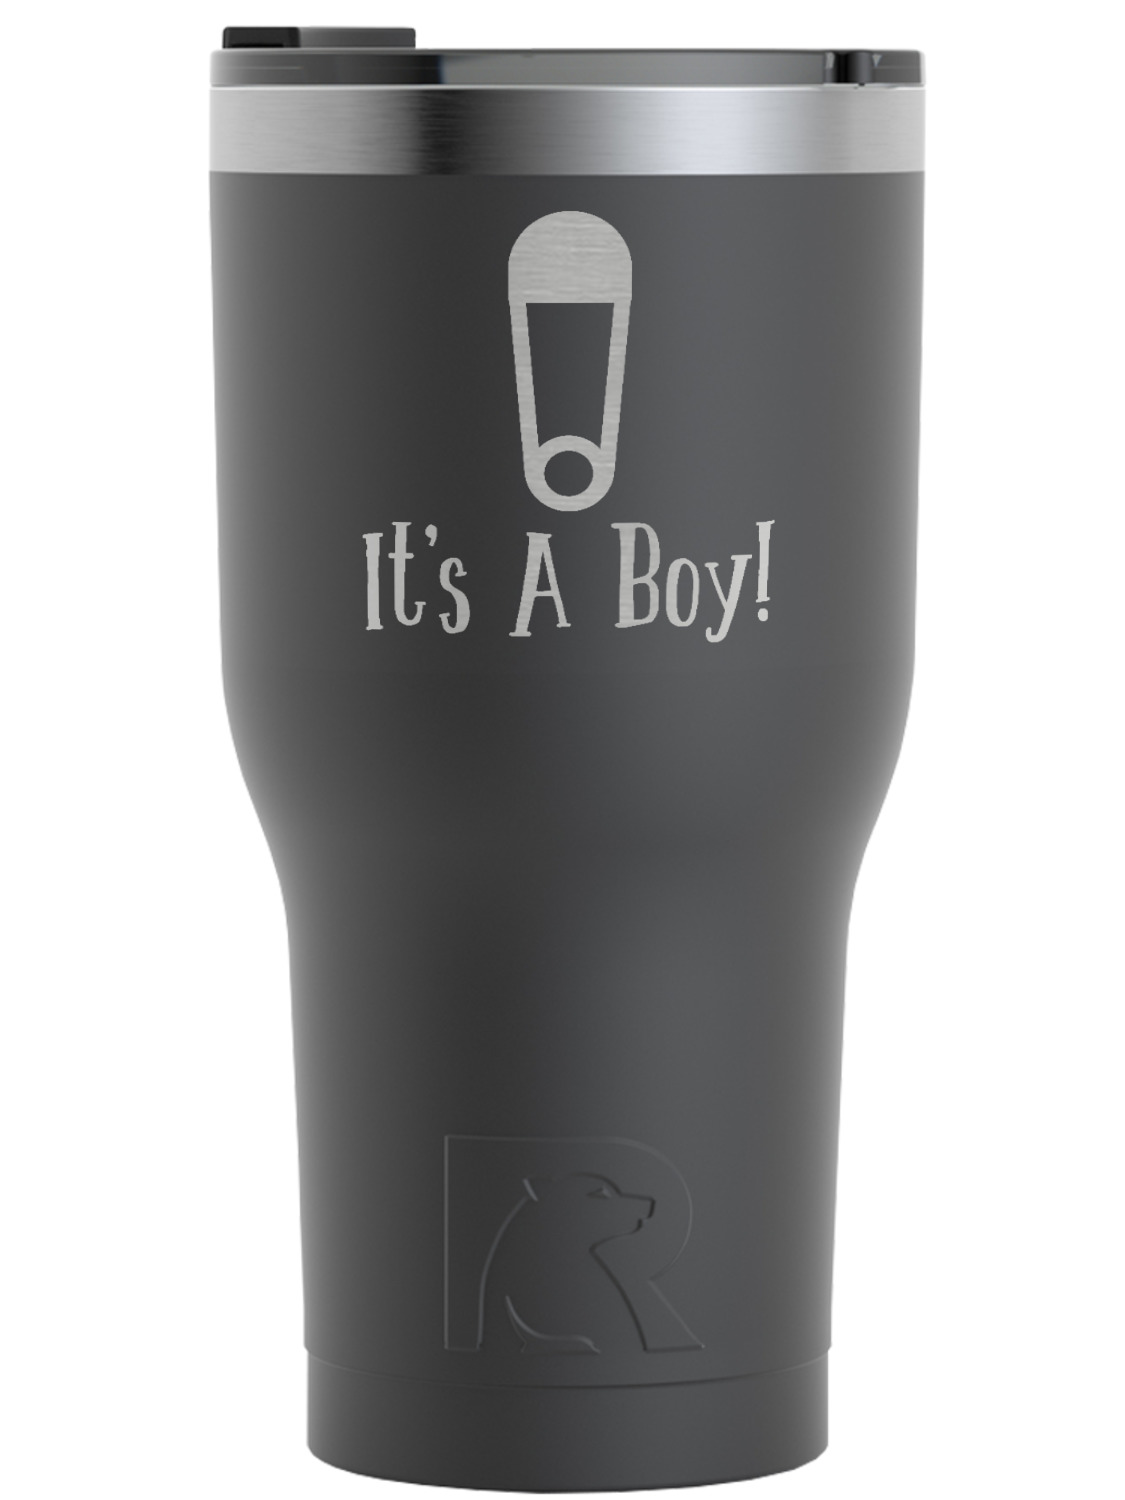 https://www.youcustomizeit.com/common/MAKE/1070461/Baby-Shower-Black-RTIC-Tumbler-Front-2.jpg?lm=1665683399